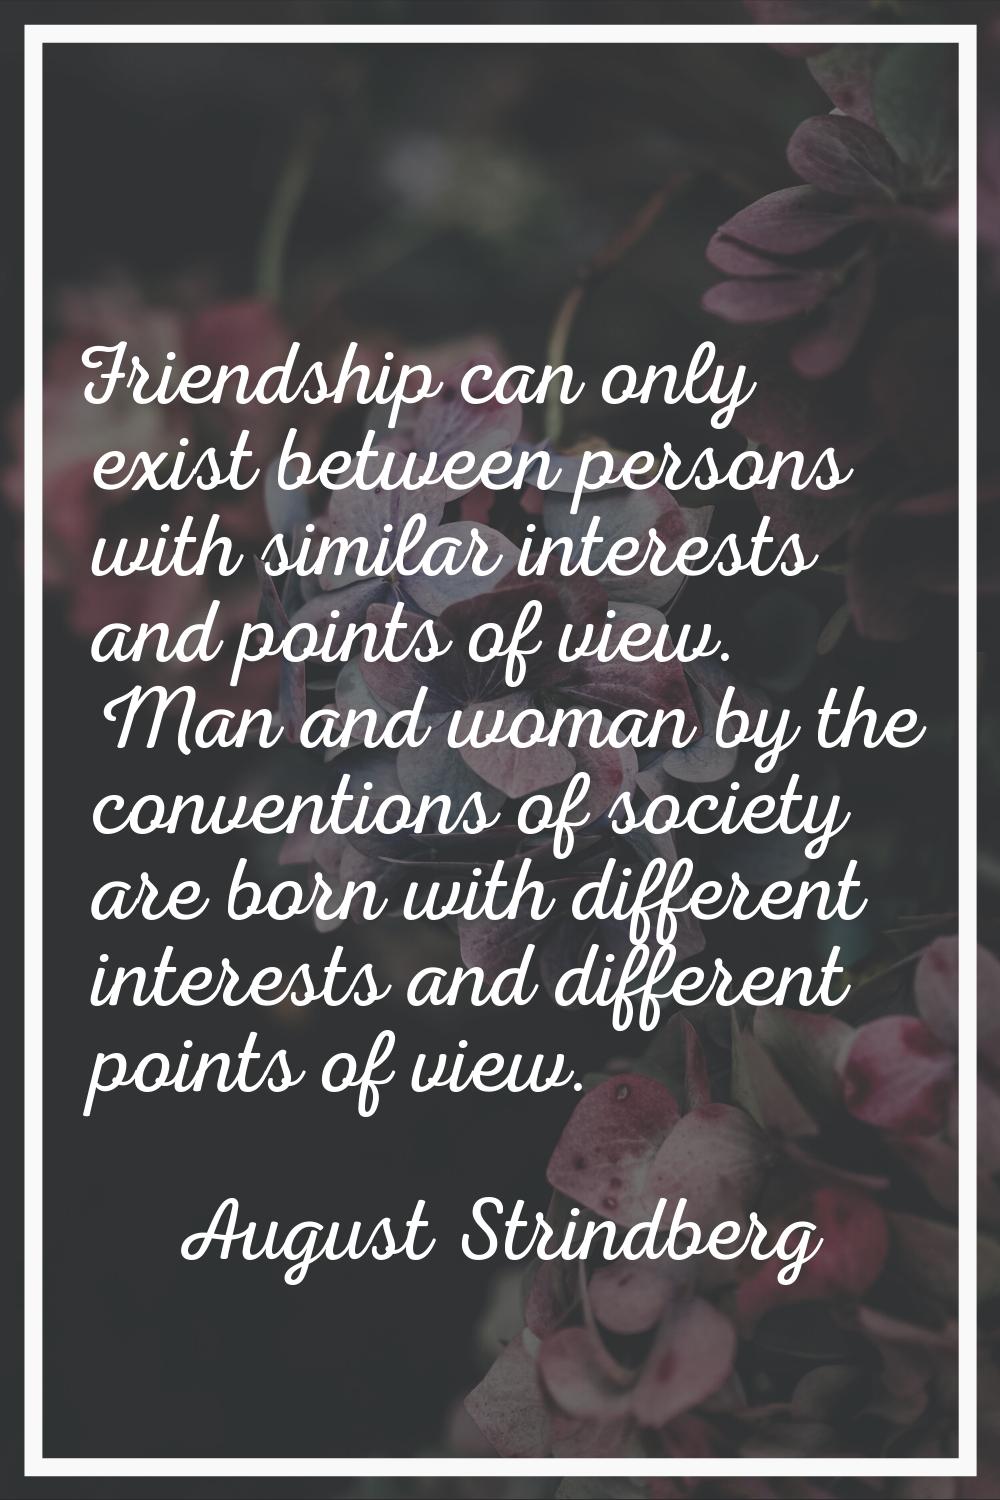 Friendship can only exist between persons with similar interests and points of view. Man and woman 